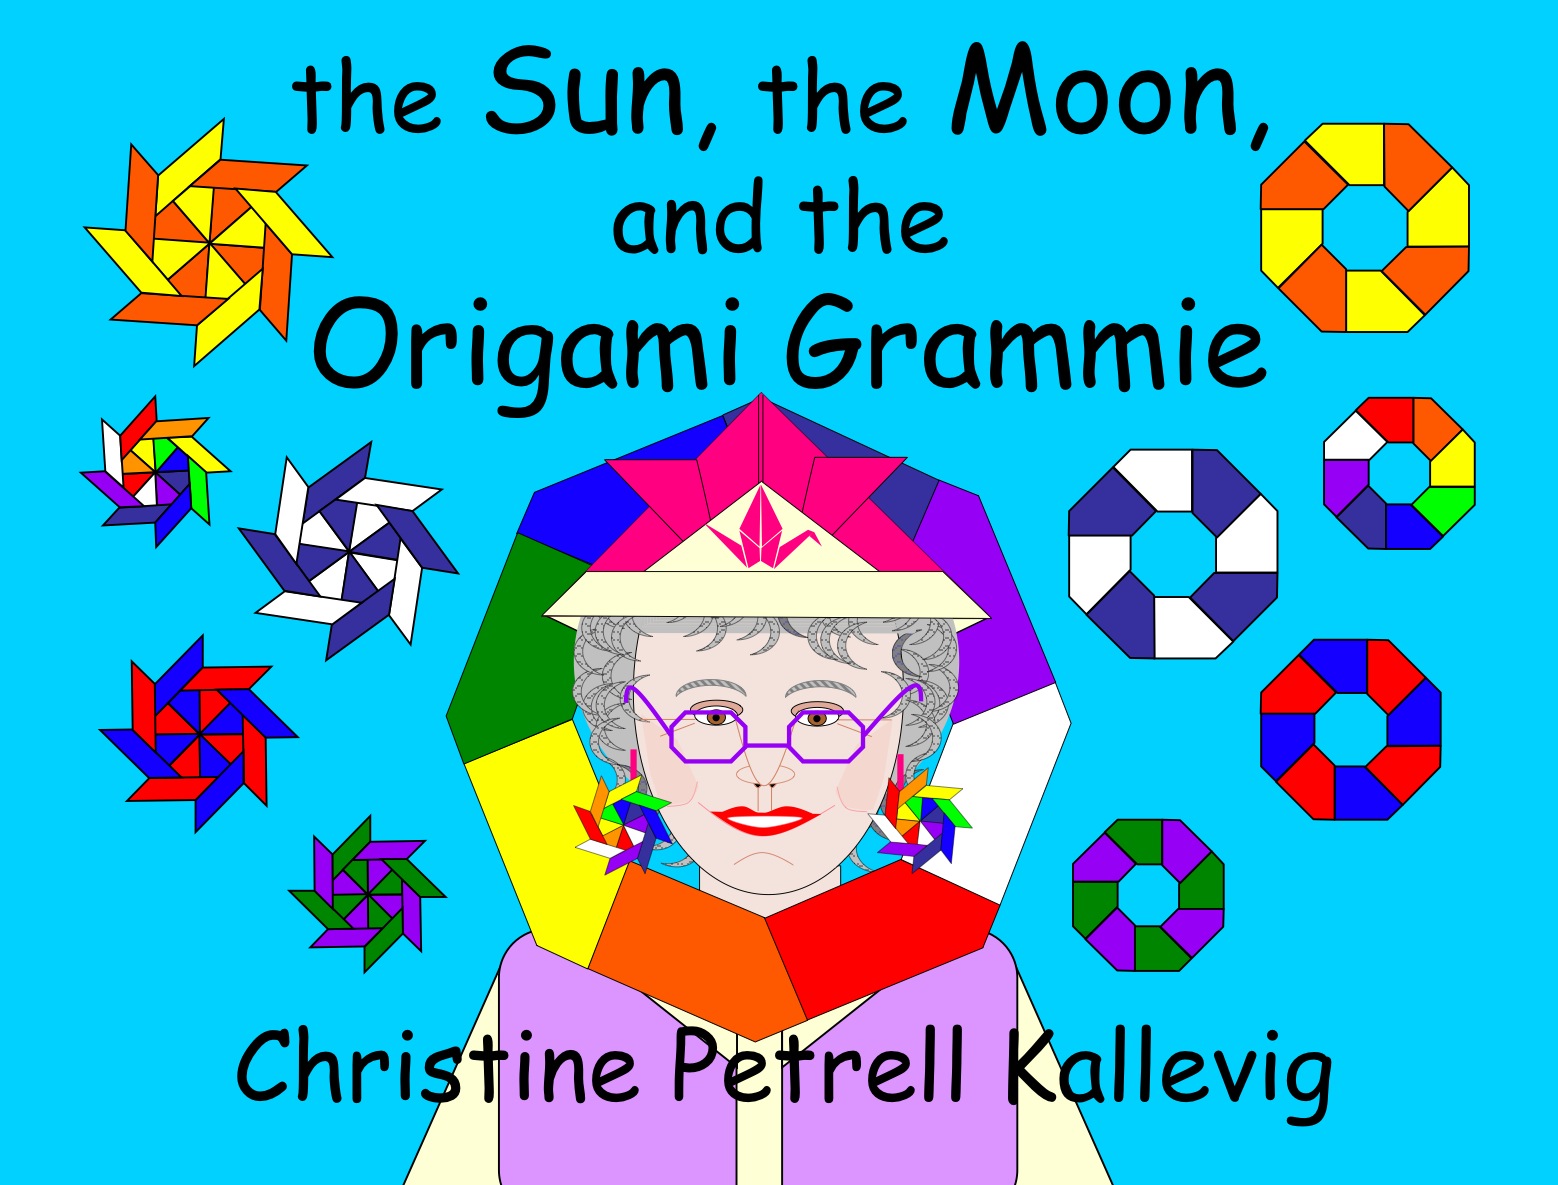 The Sun, The Moon, and the Origami Grammie by Christine Kallevig